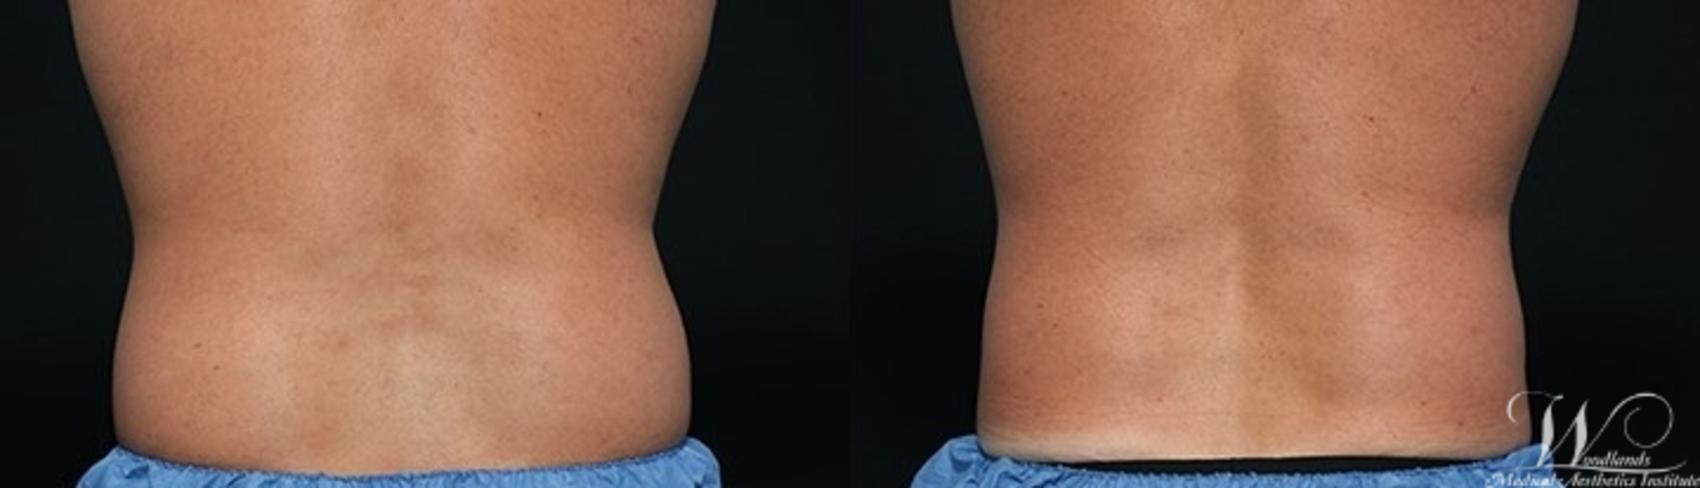 Before & After CoolSculpting® Case 10 Back View in The Woodlands, TX